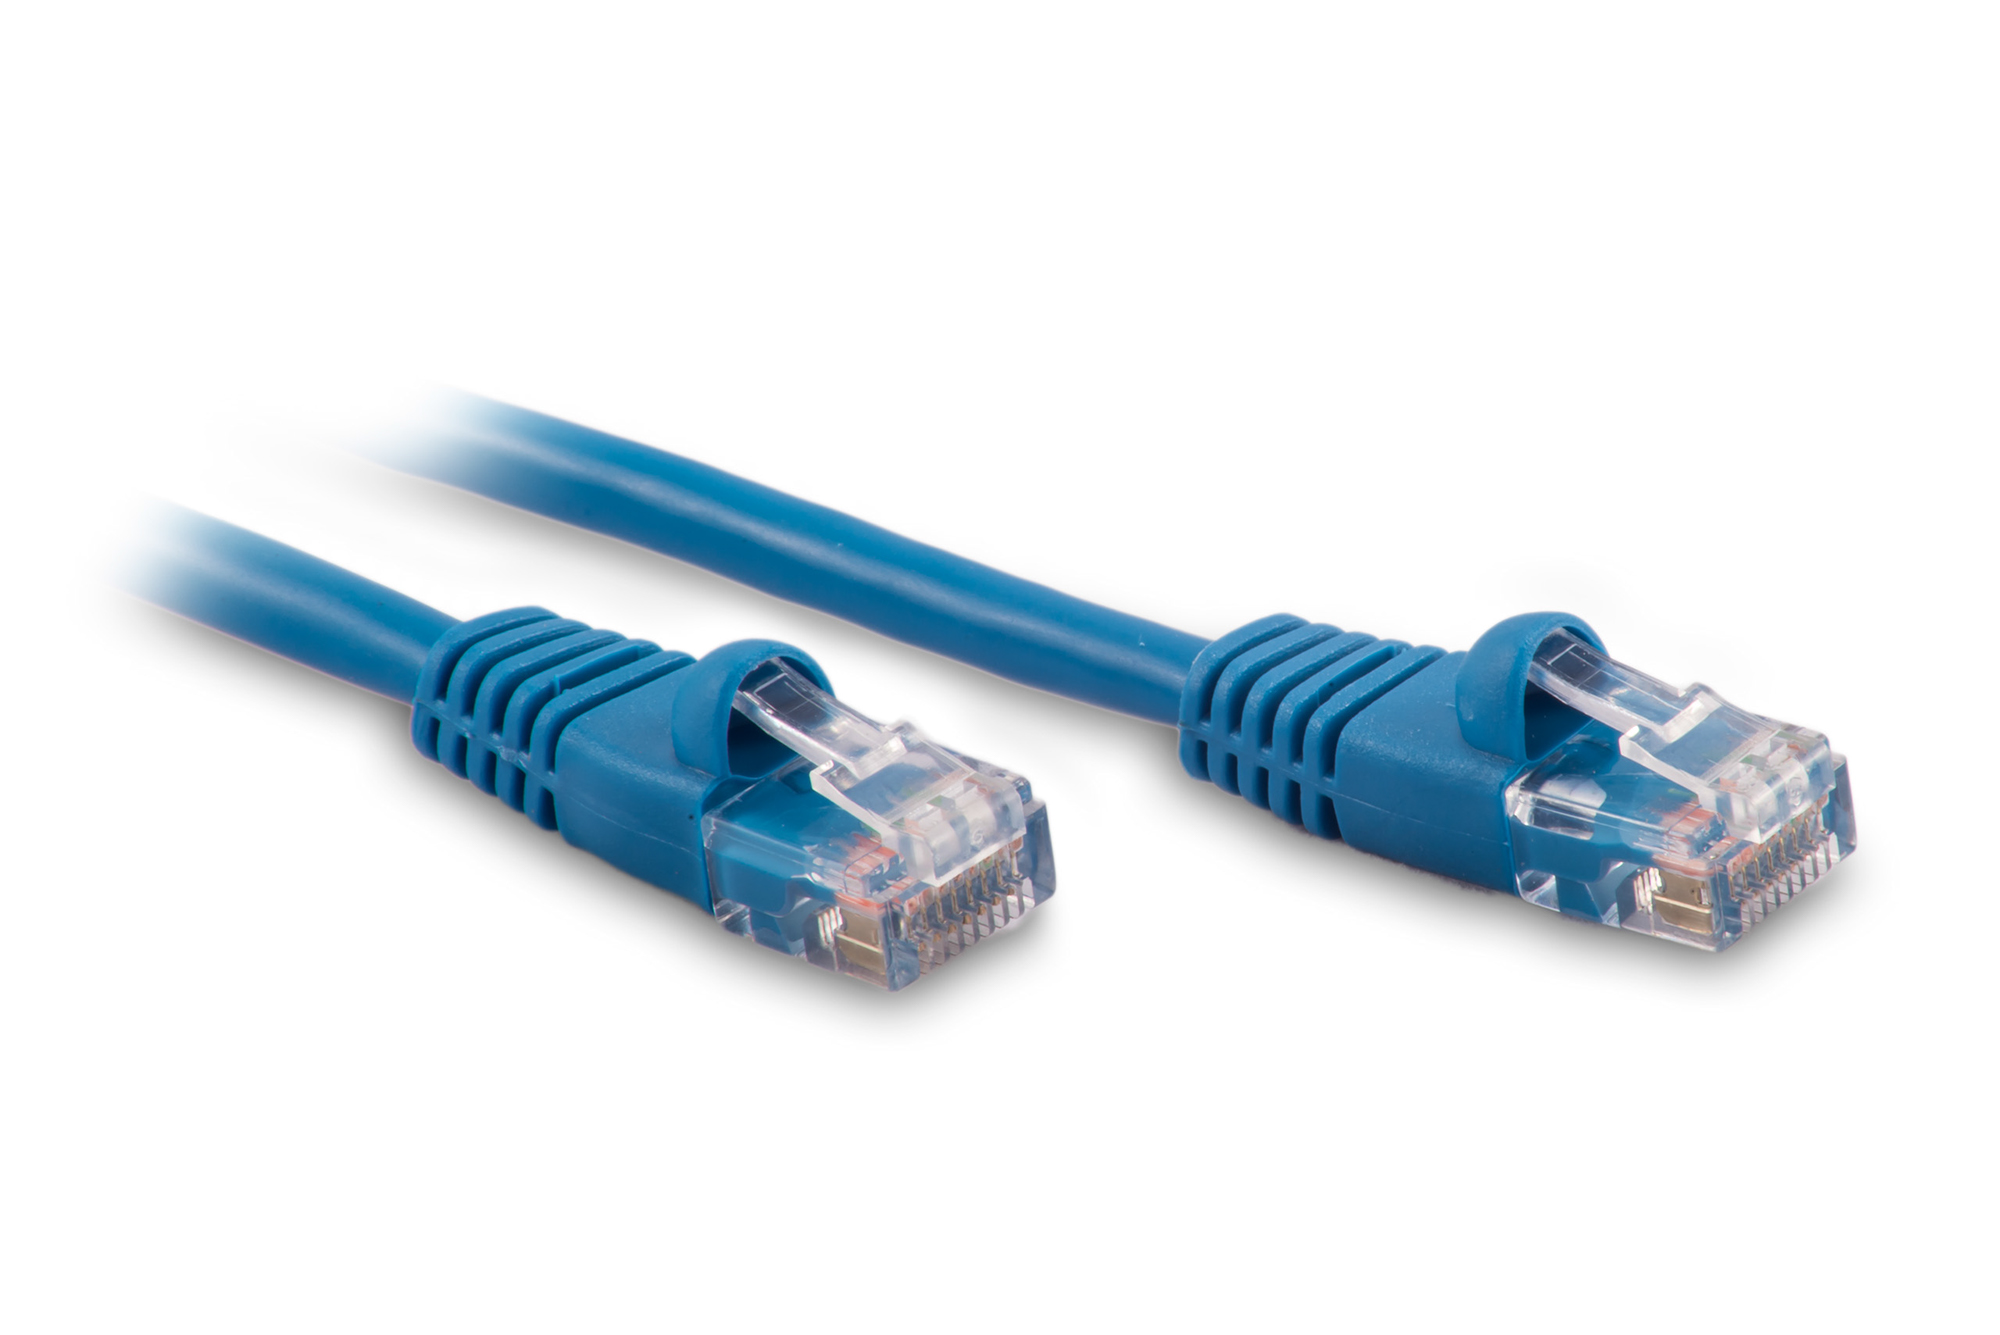 8ft Cat6 Ethernet Patch Cable - Blue Color - Snagless Boot